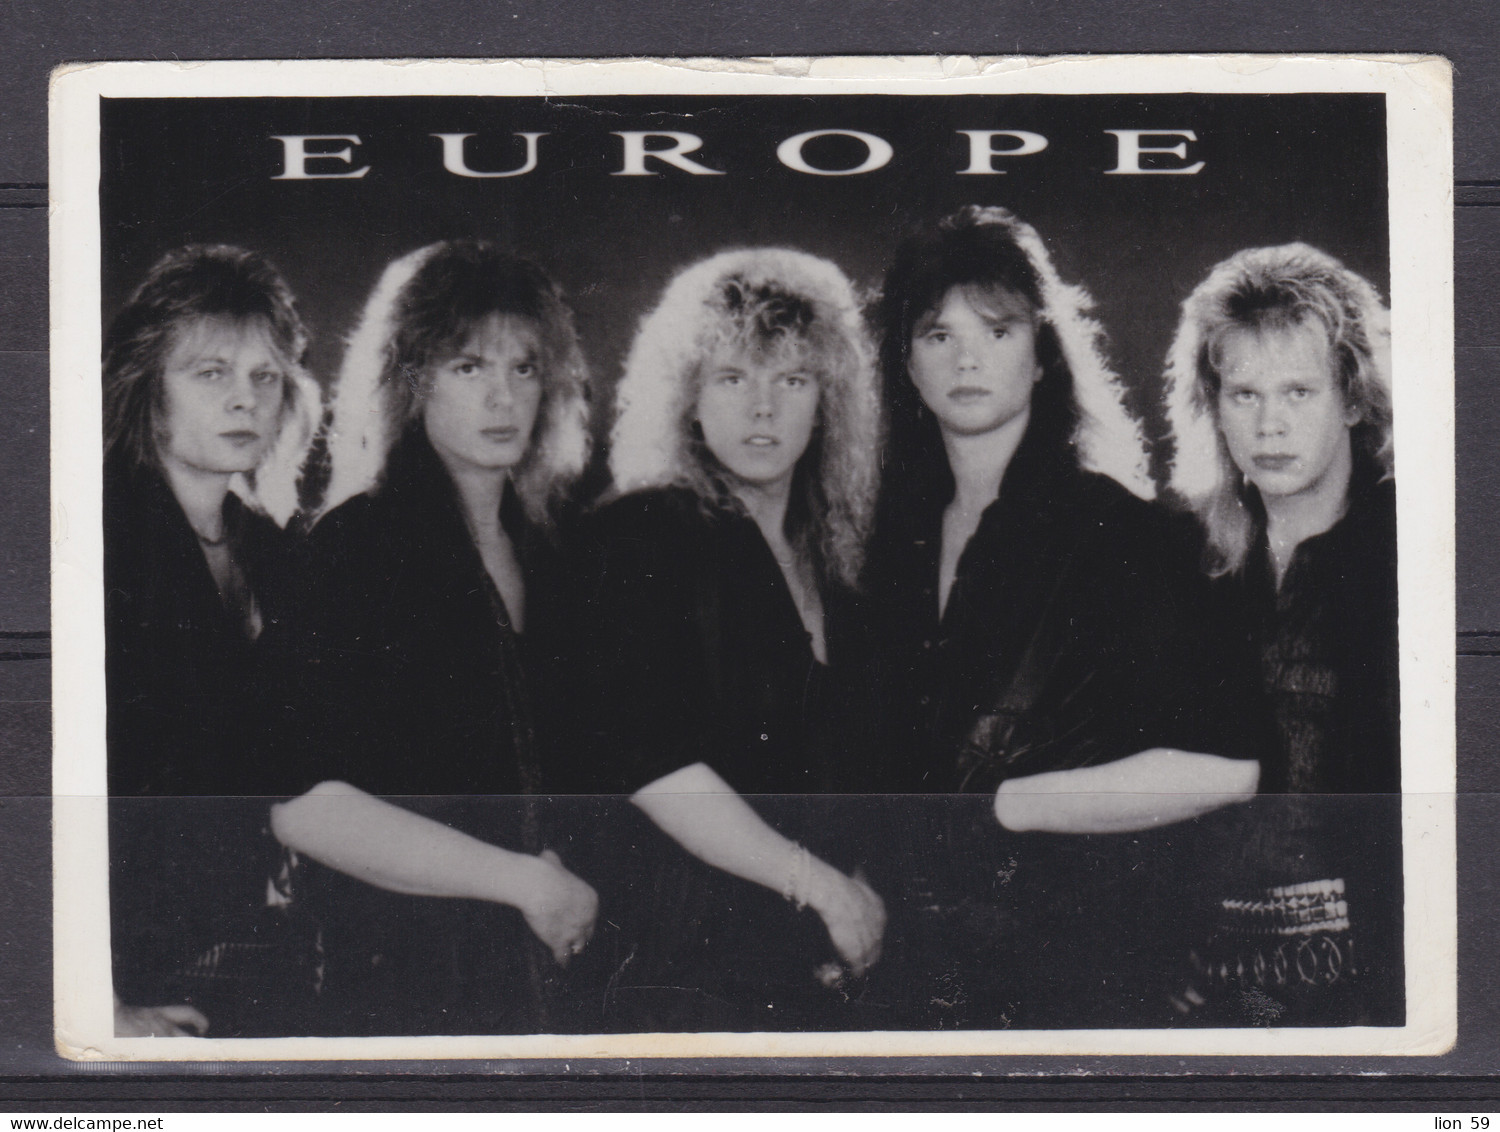 272897 / Europe (band) - Swedish Rock Band Formed In Upplands Väsby, Sweden In 1979, By Frontman Joey Tempest Photo - Photos